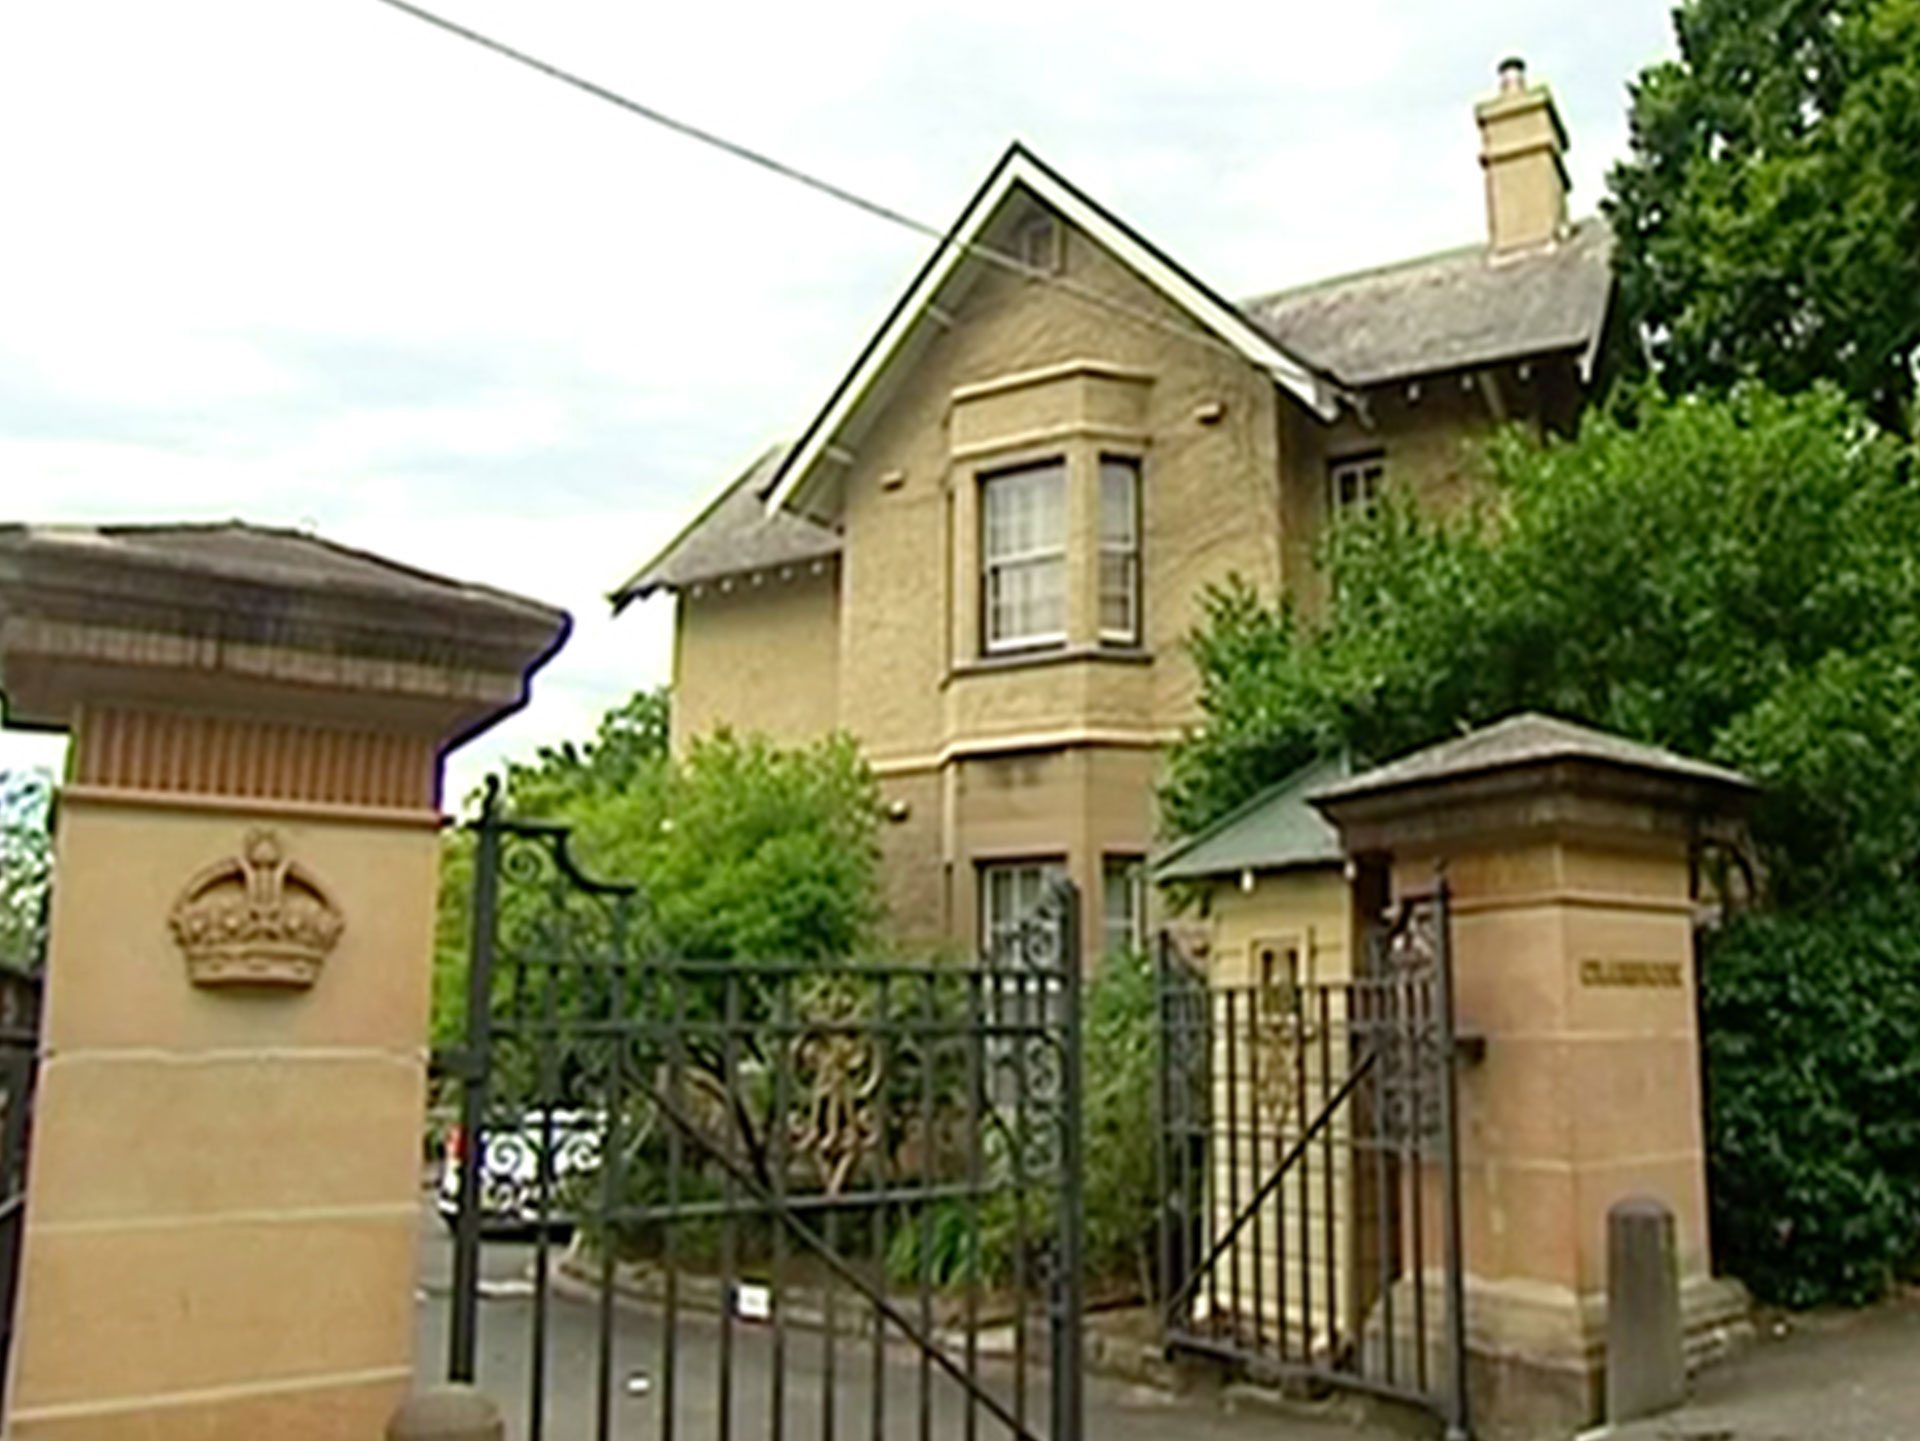 Sydney teenage boy allegedly raped a girl at a party while his friend filmed